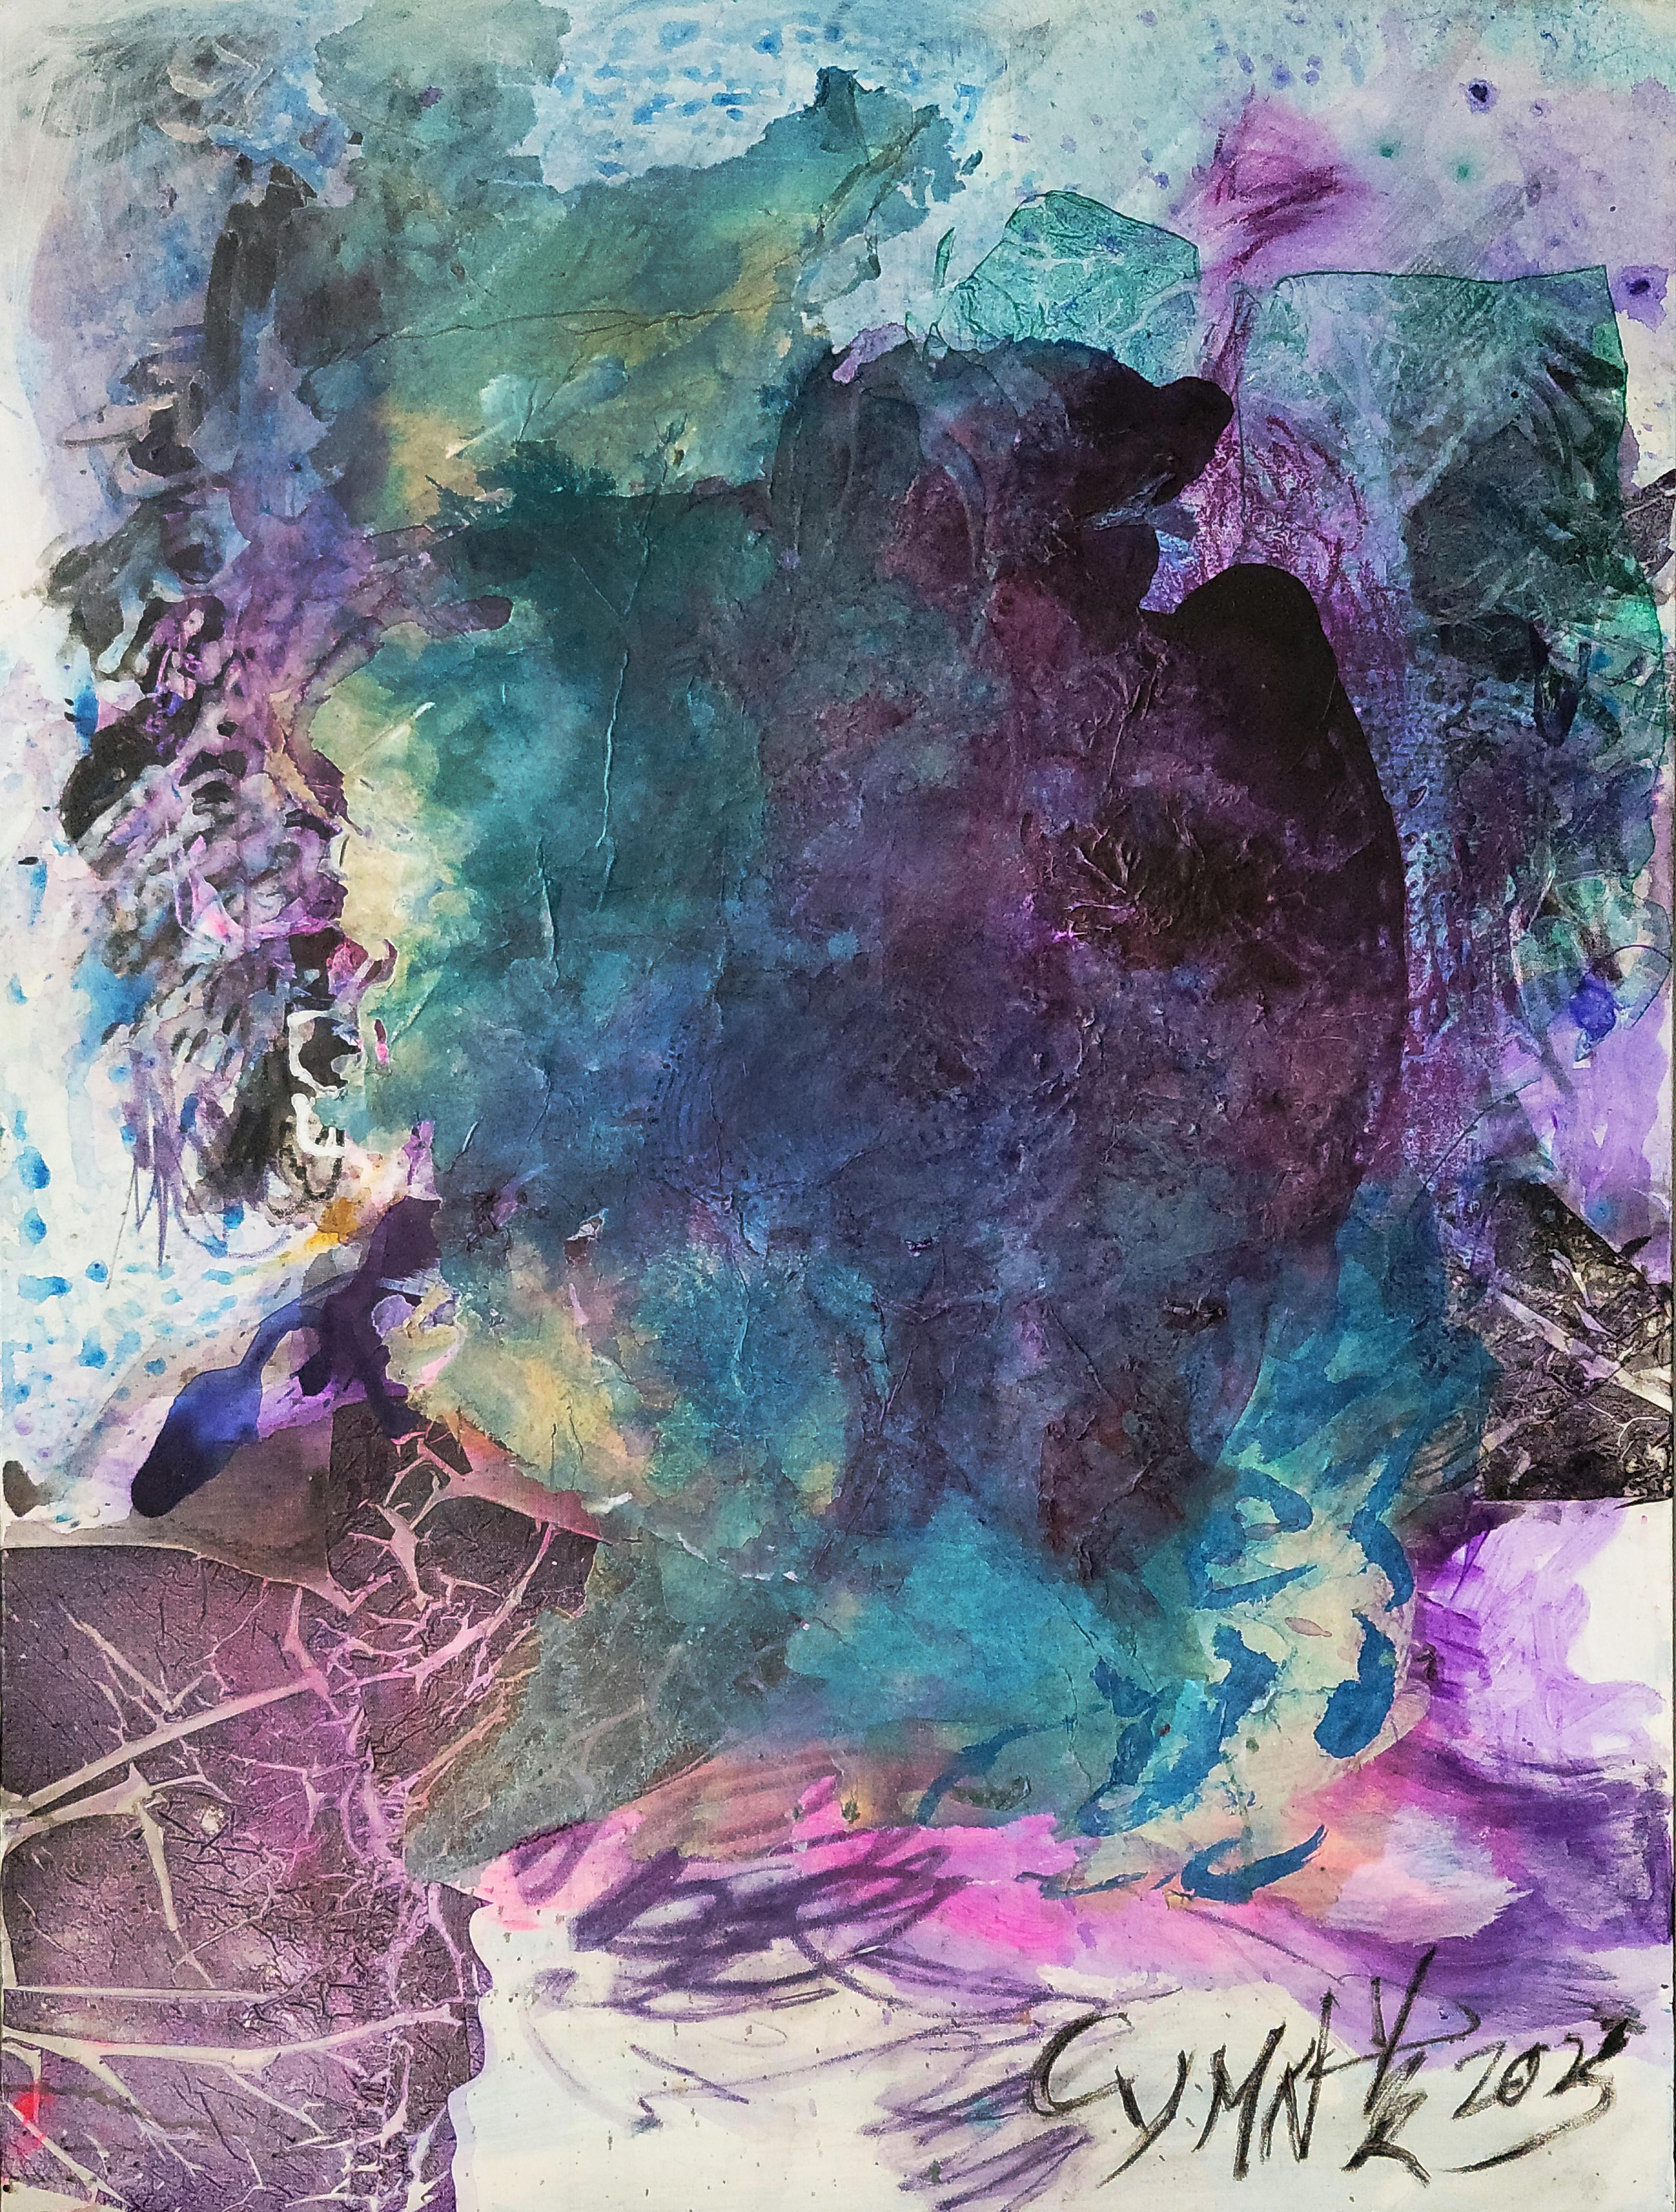 Emerge and Transcend- Expressive, Abstract Landscape, Zen Calligraphy  - Painting by Cymn Wong 